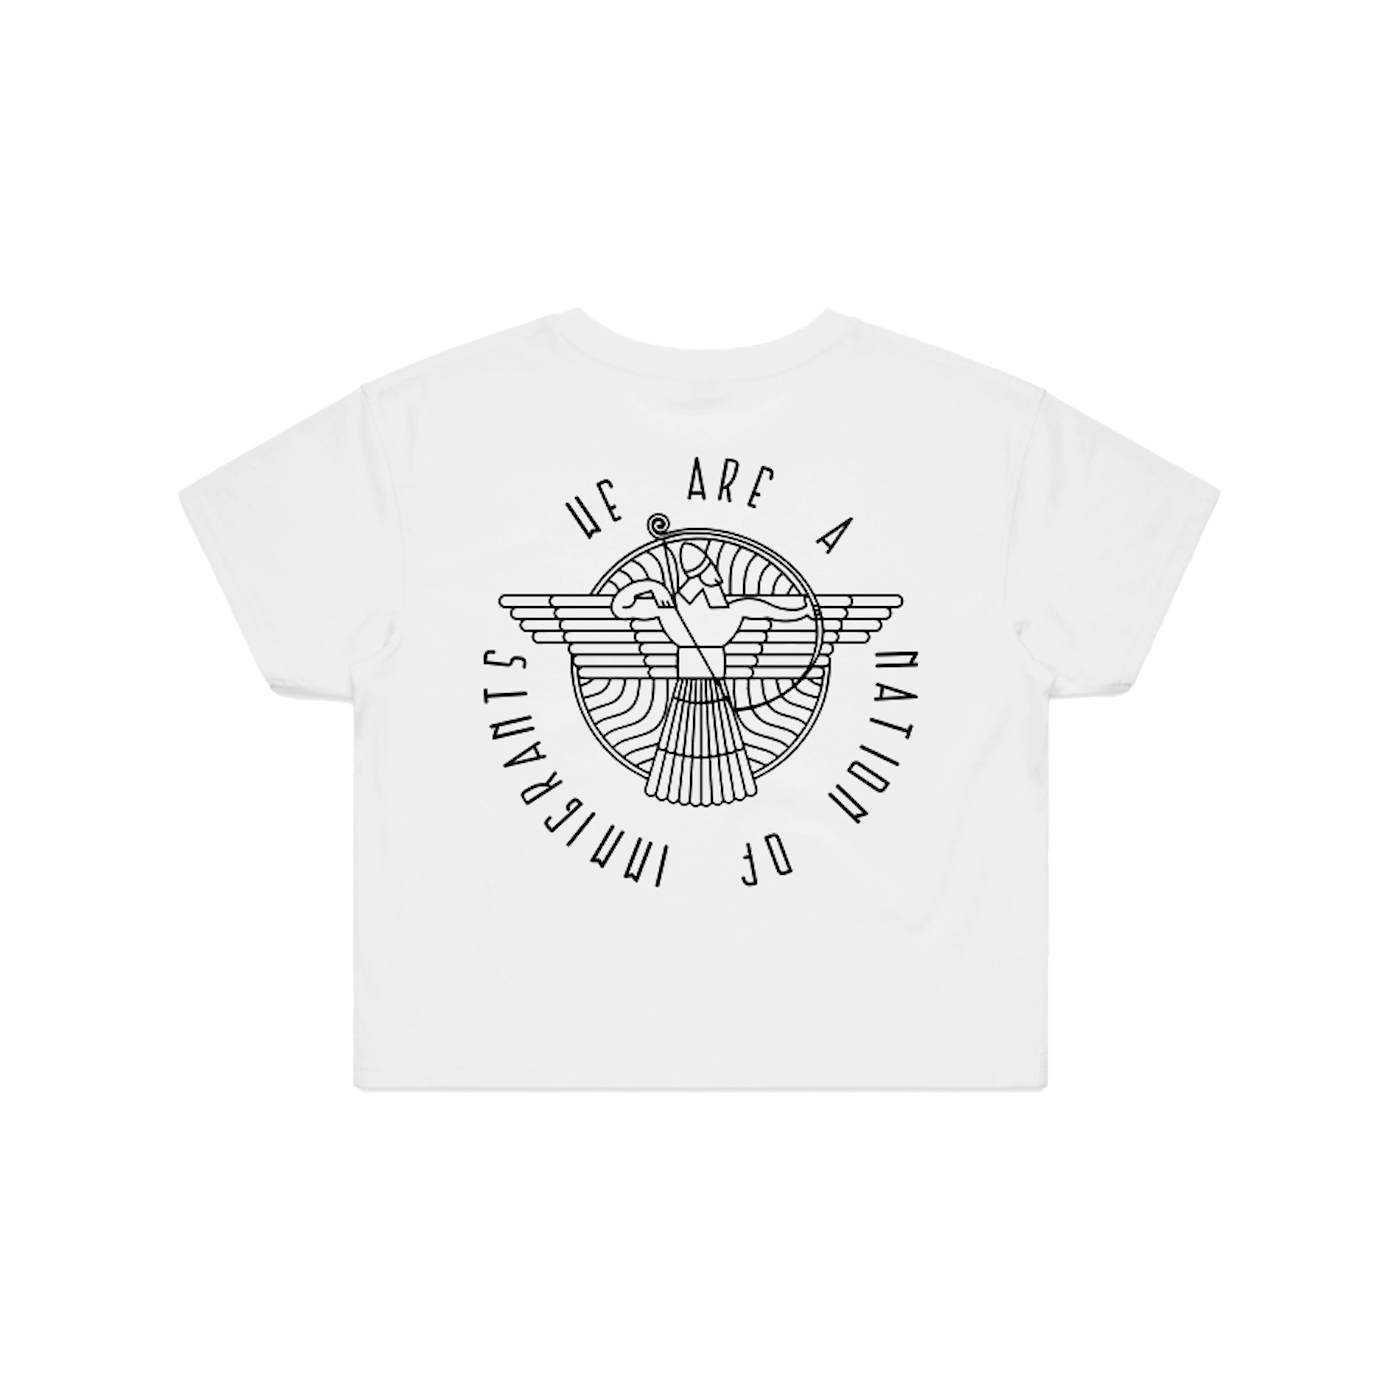 Soft Cactus "The Shlama Collection" Crop T-Shirt